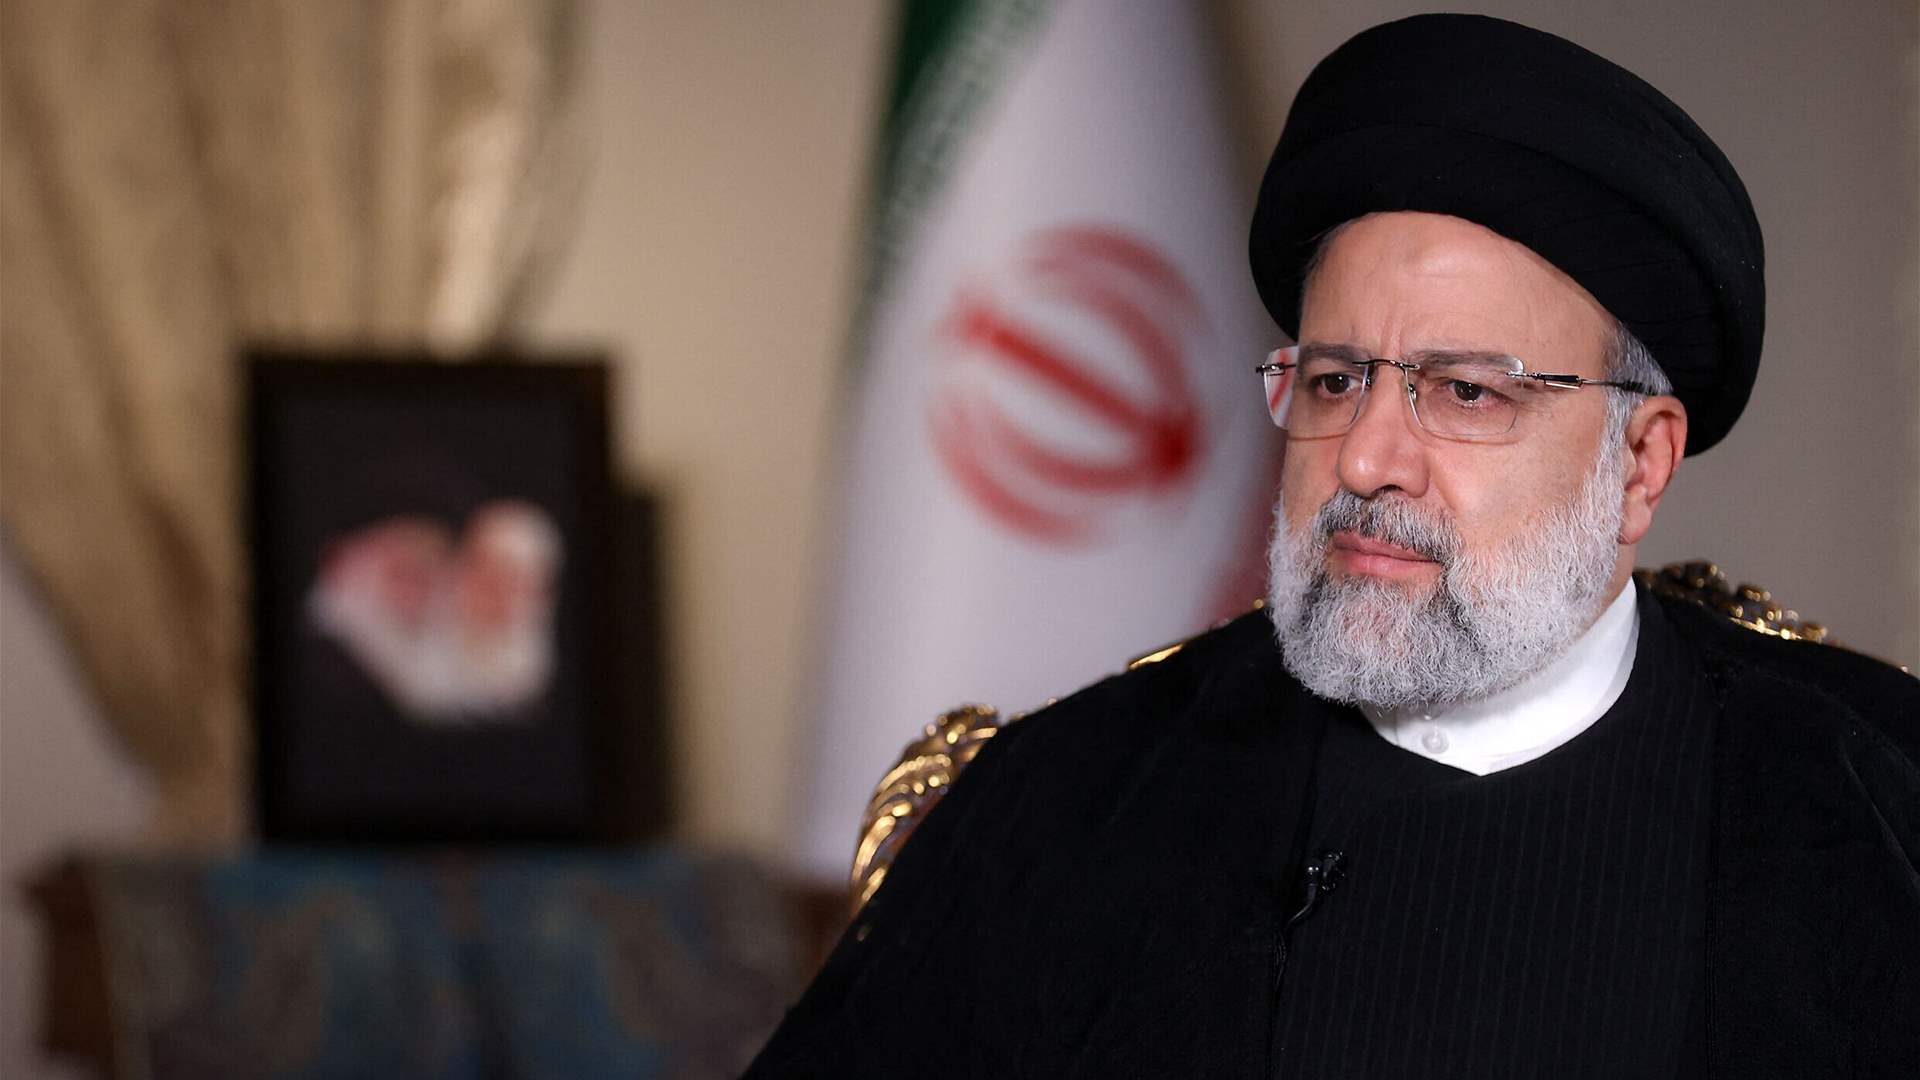 Complaint in Switzerland accuses Iran President of committing ‘crimes against humanity’